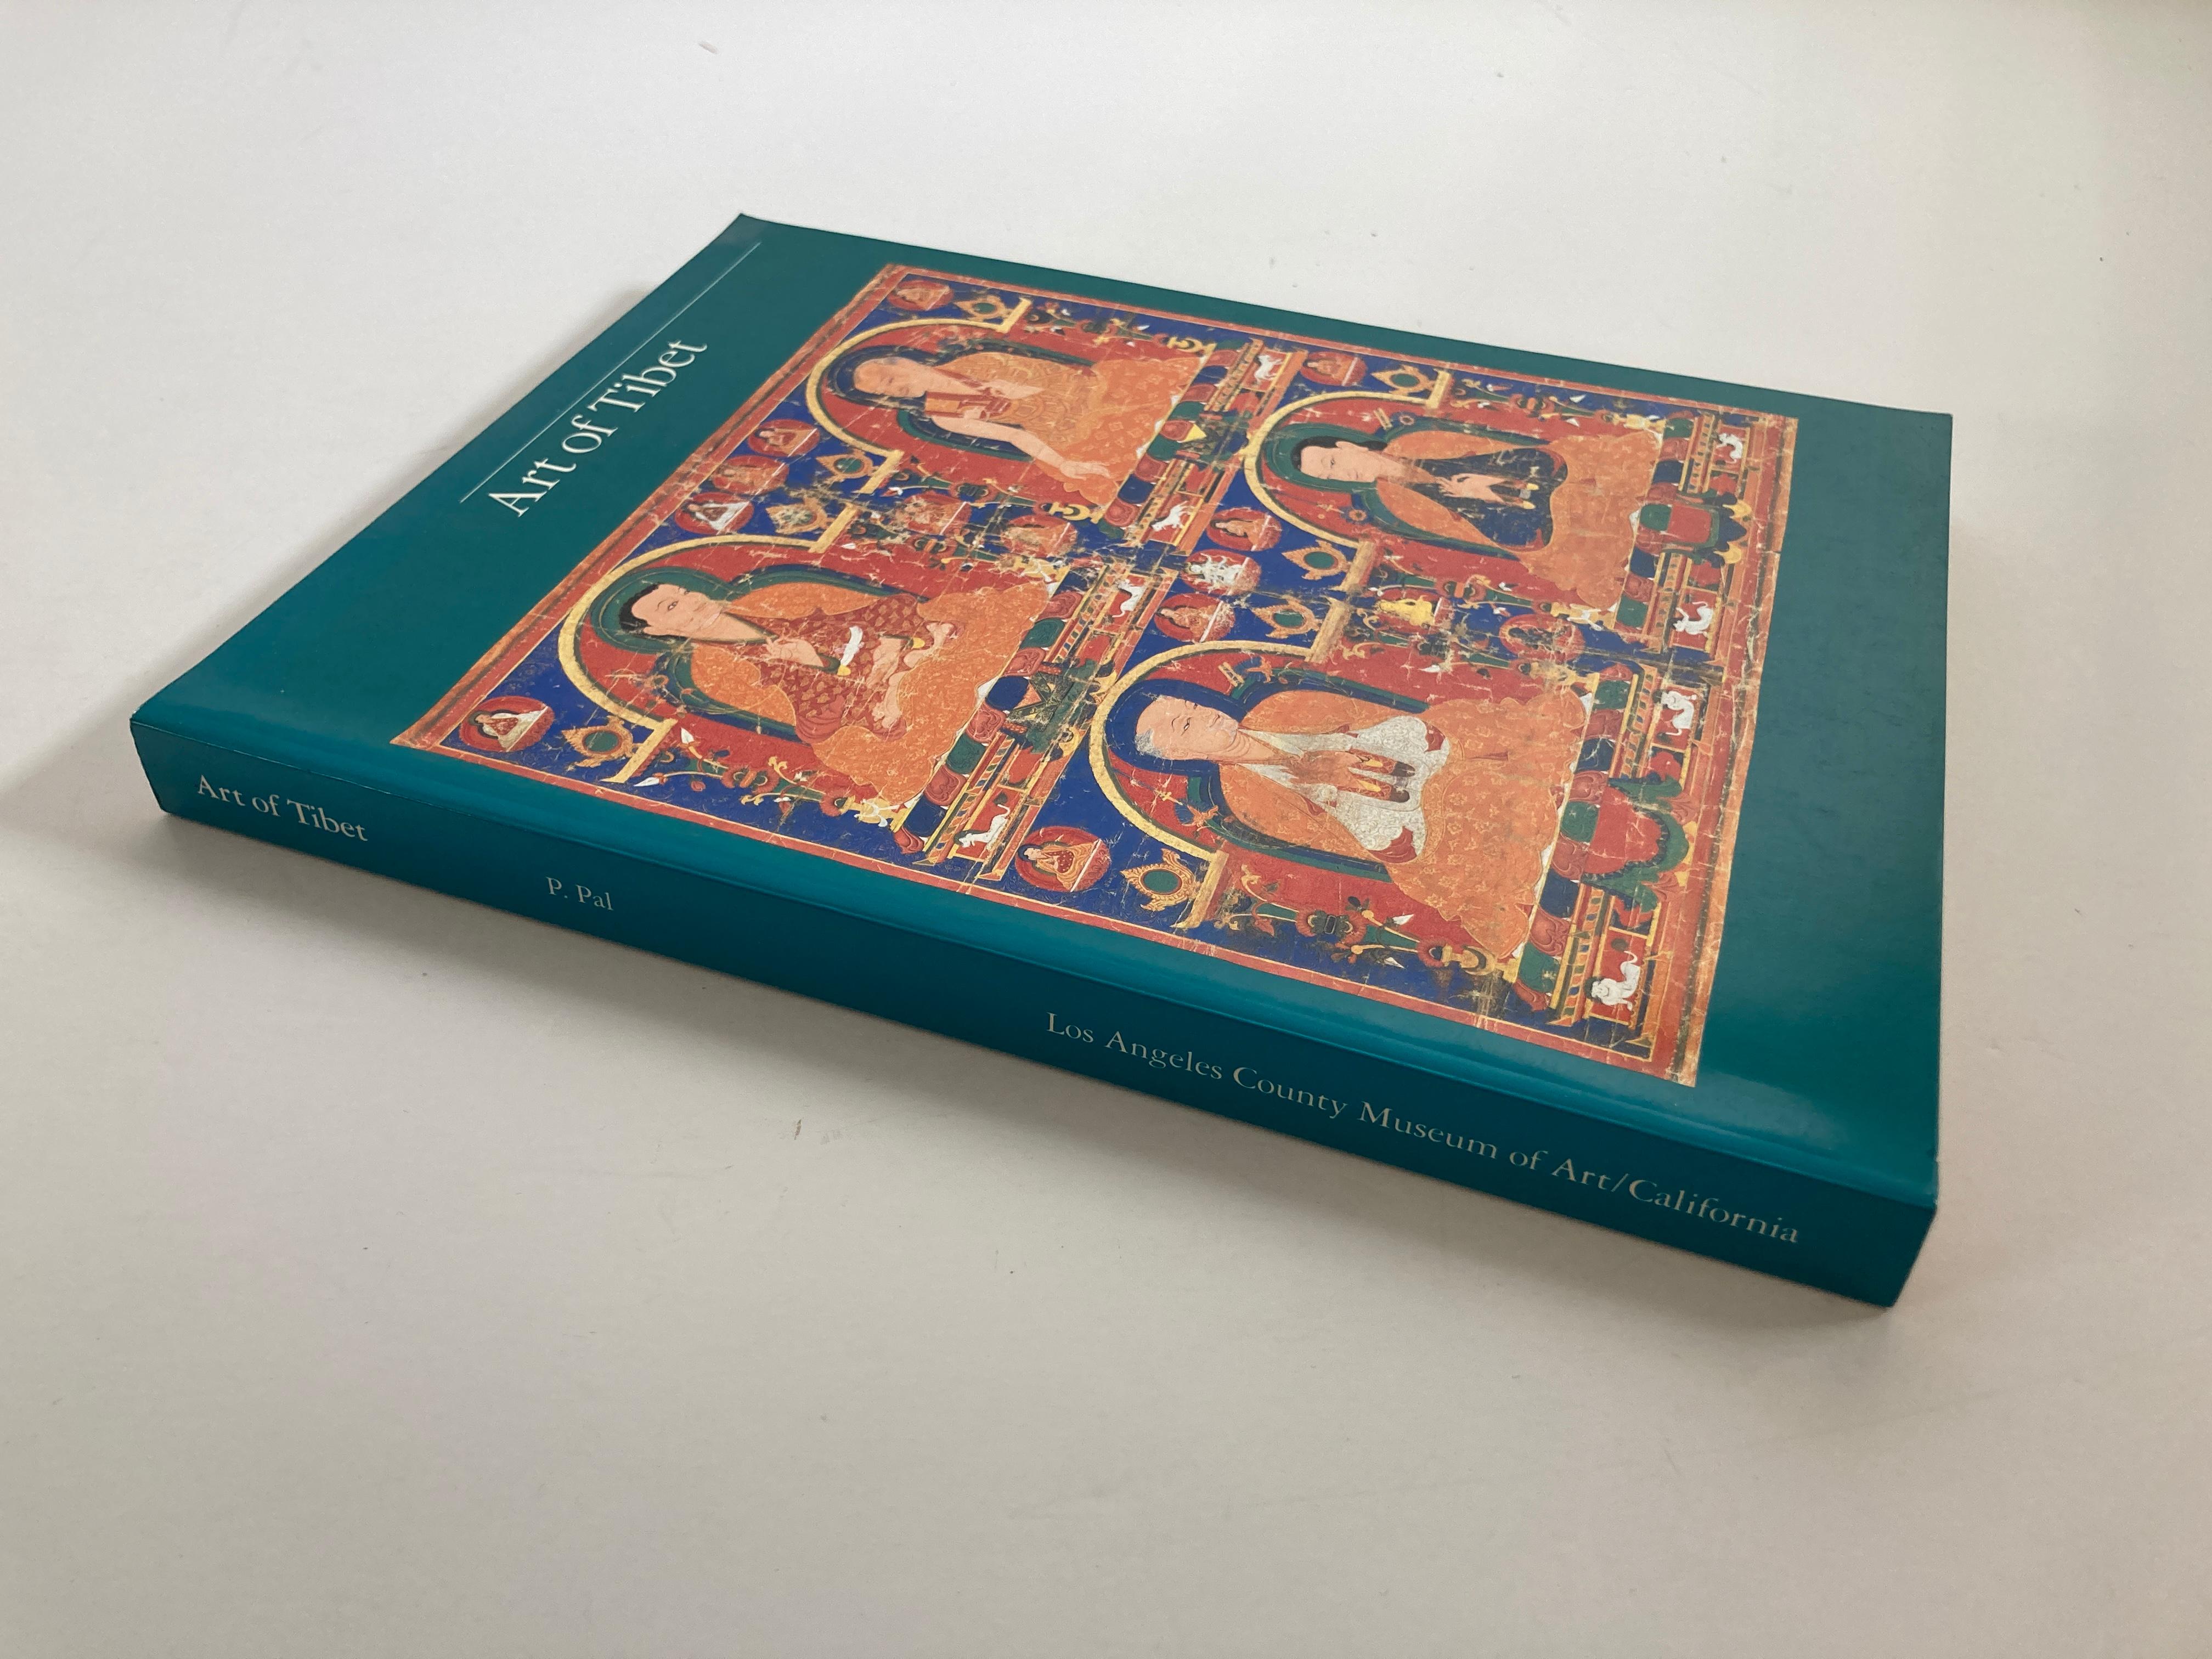 Art of Tibet
 – November 1, 1990
by Pratapaditya Pal.
Publisher: Harry N Abrams; Expanded Ed edition (November 1, 1990)
Language: : English
Hardcover: 343 pages
Art of Tibet: A Catalogue of the Los Angeles County Museum of Art